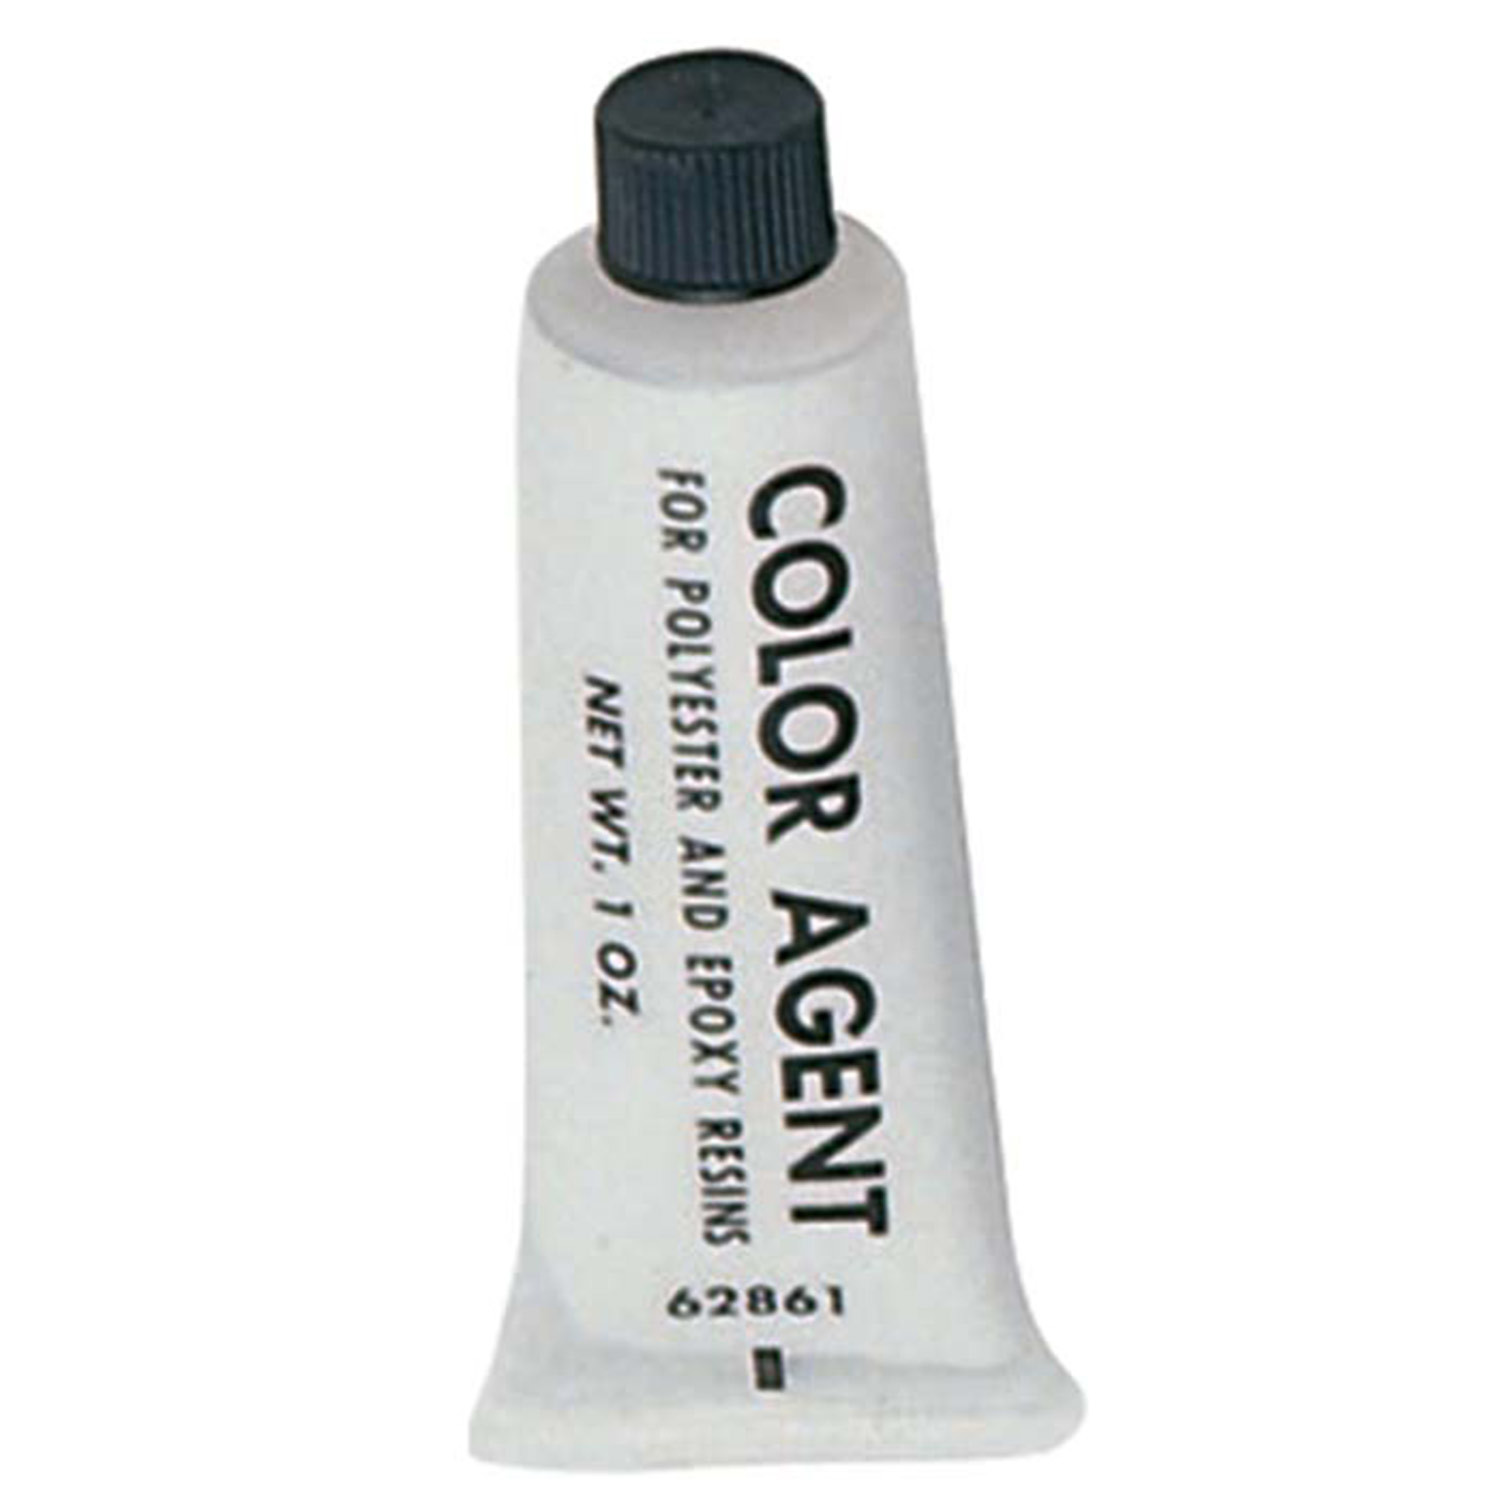 Black Pigment for Epoxy Resin, Gelcoat, Paint - 1 oz 